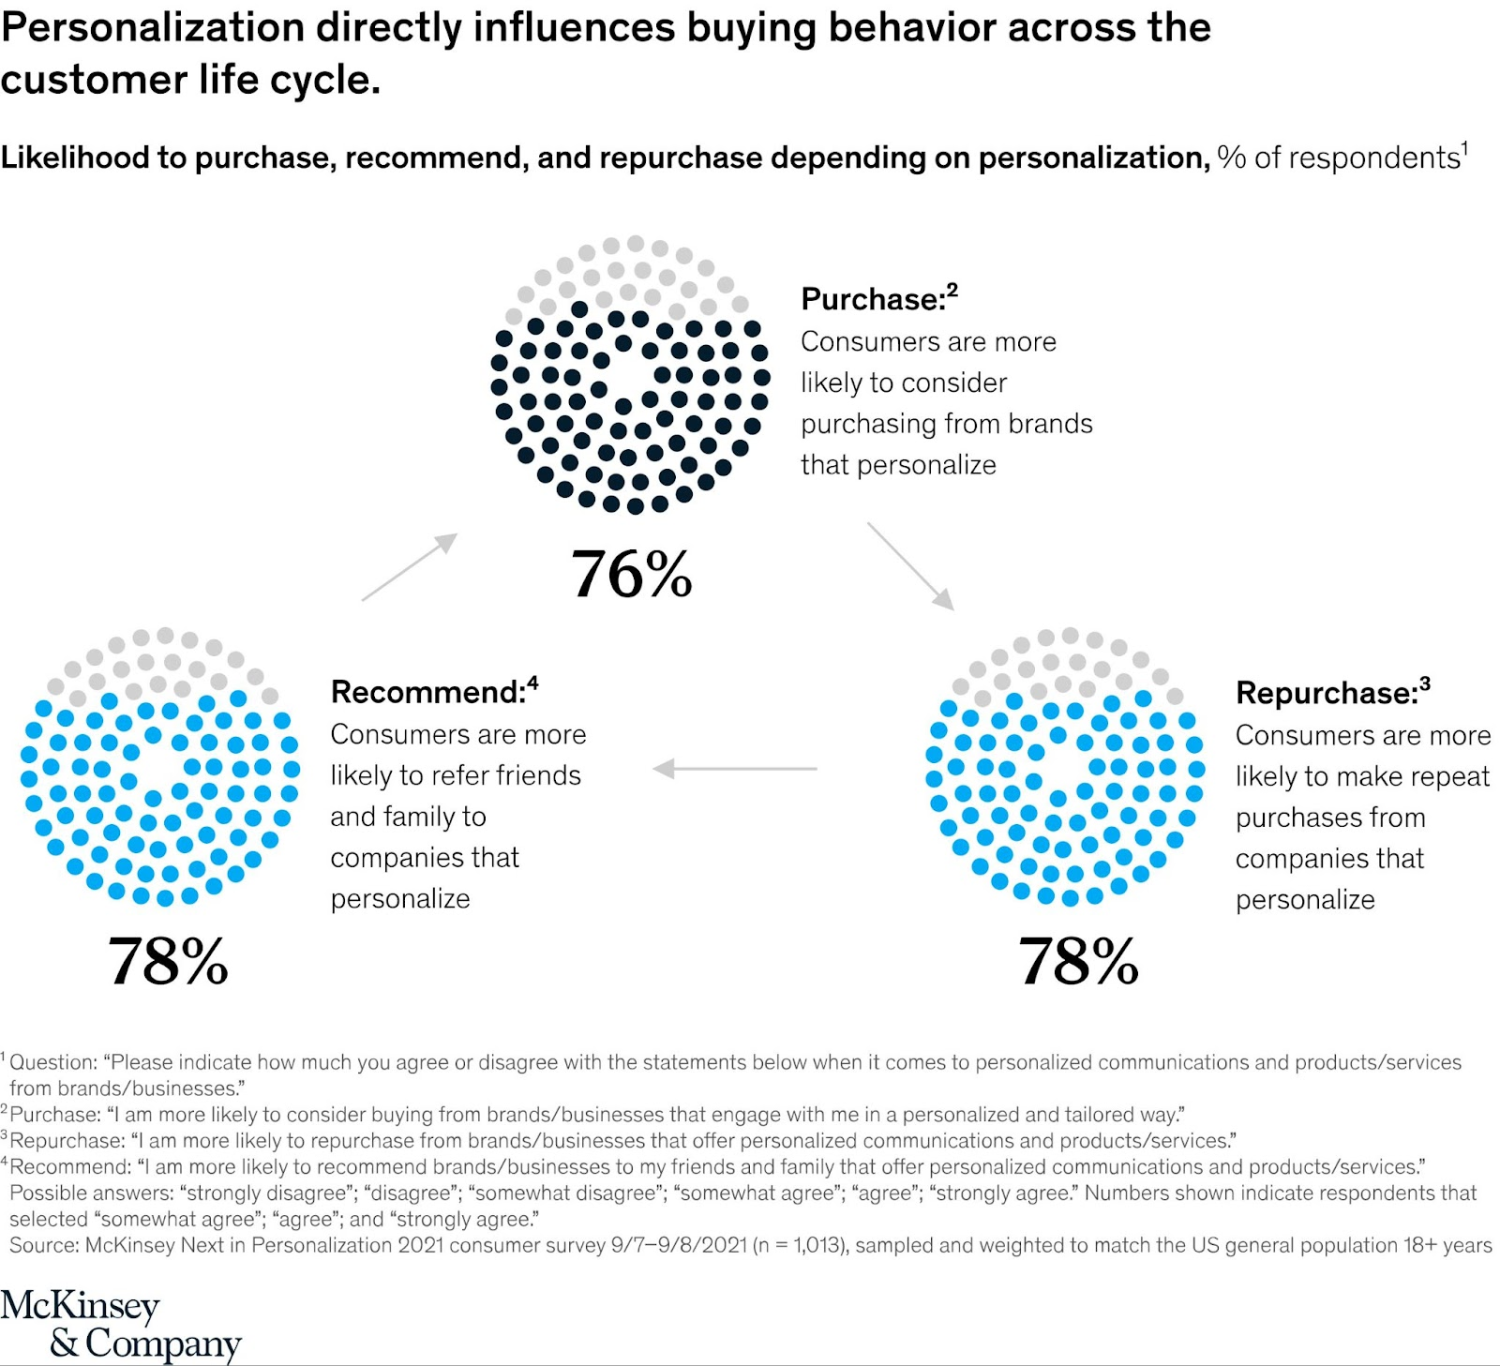 McKinsey & Company stats on Consumer behaviour towards companies that personalize.